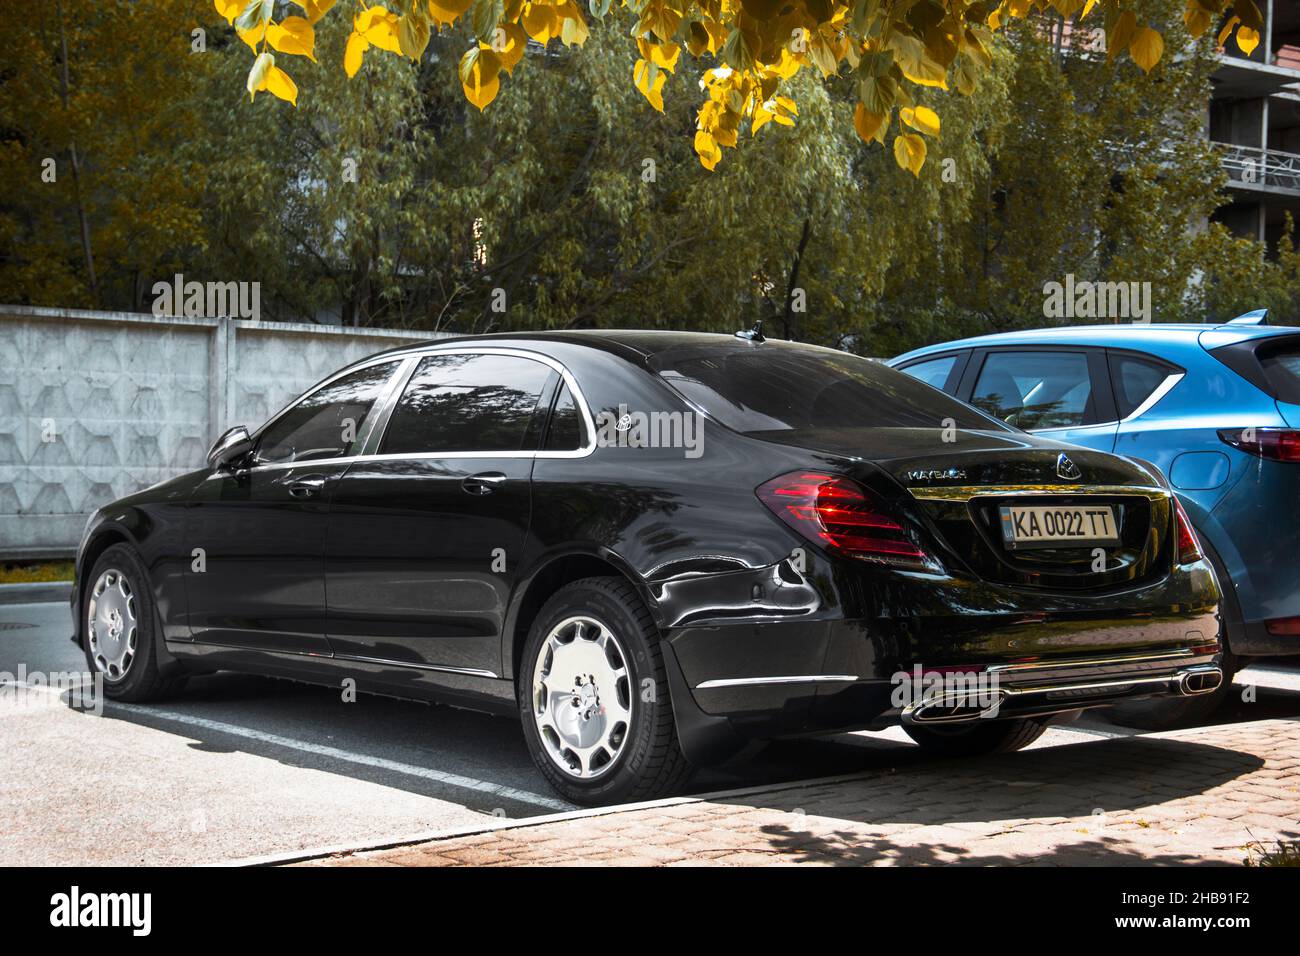 Kiev, Ukraine - May 22, 2021: Luxury car Mercedes-Benz Maybach S560 parked in the city Stock Photo